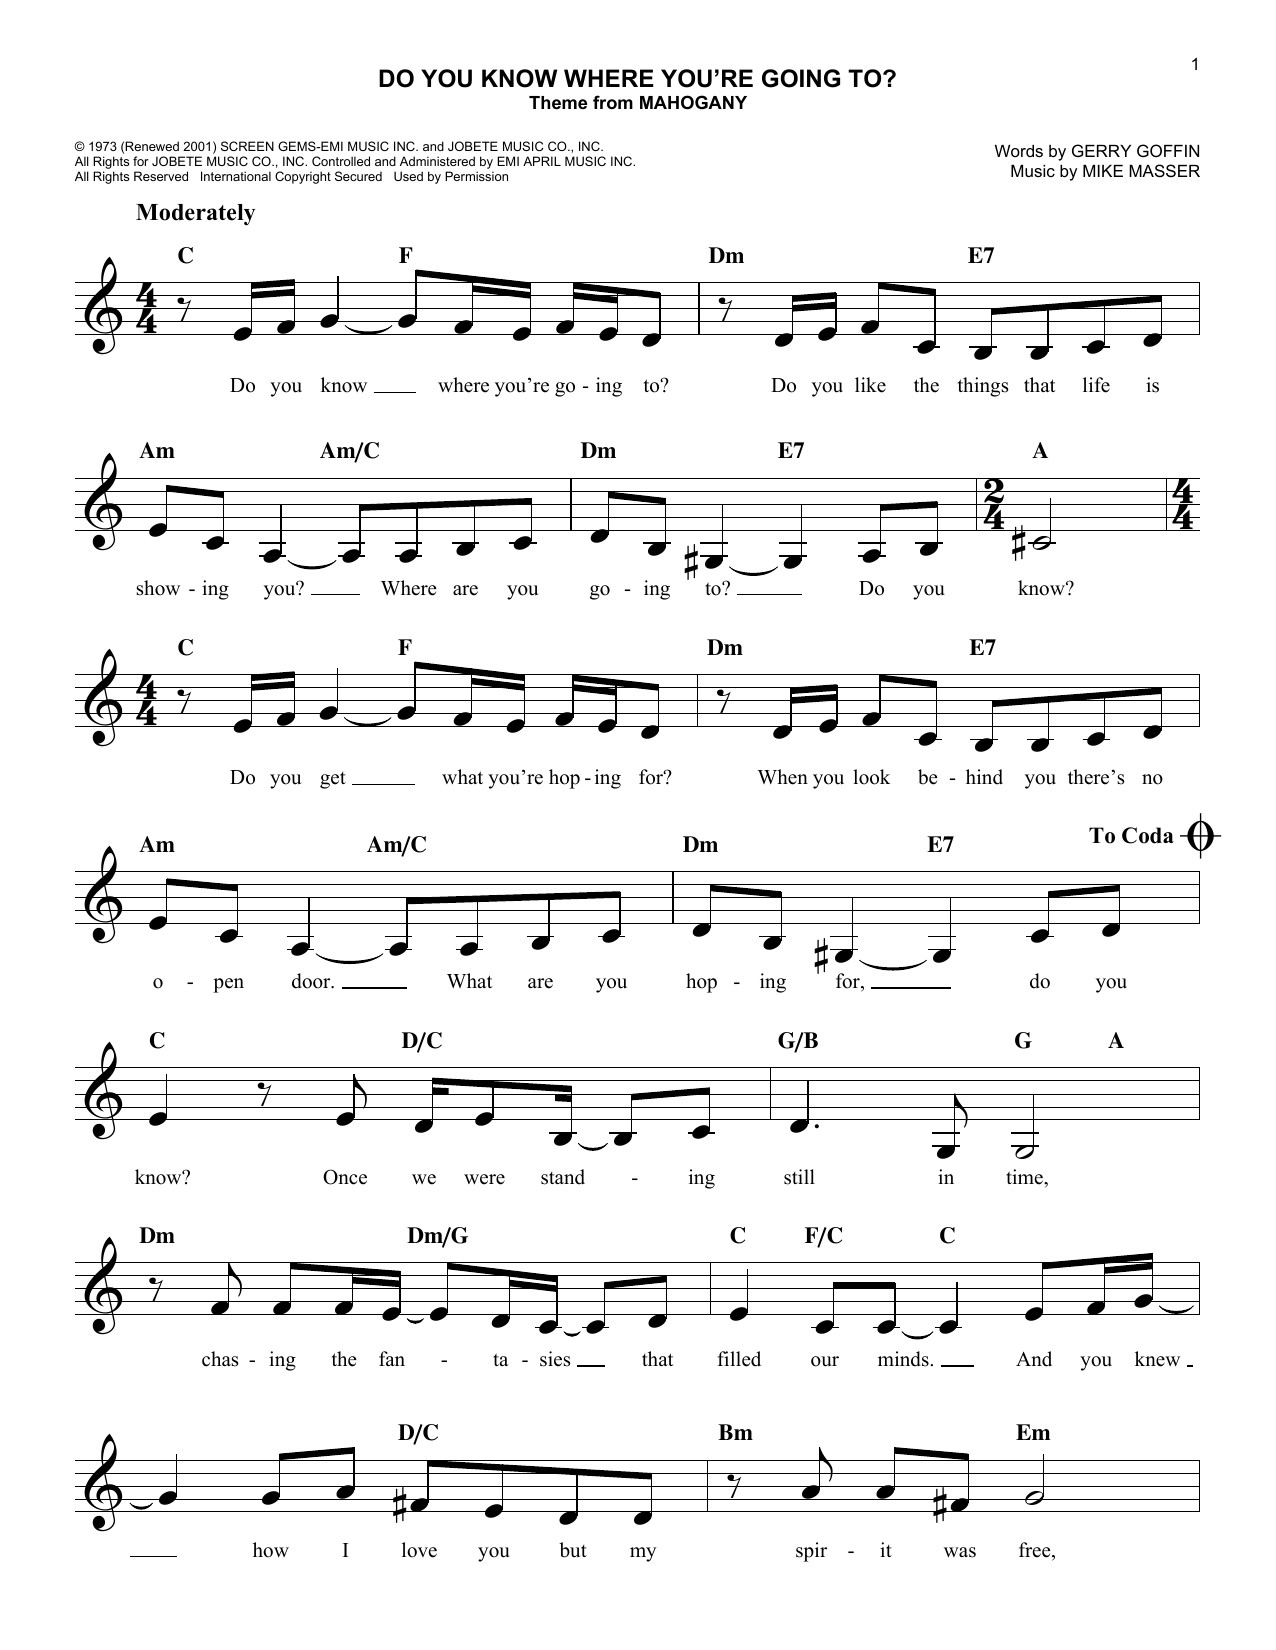 Download Diana Ross Do You Know Where You're Going To? Sheet Music